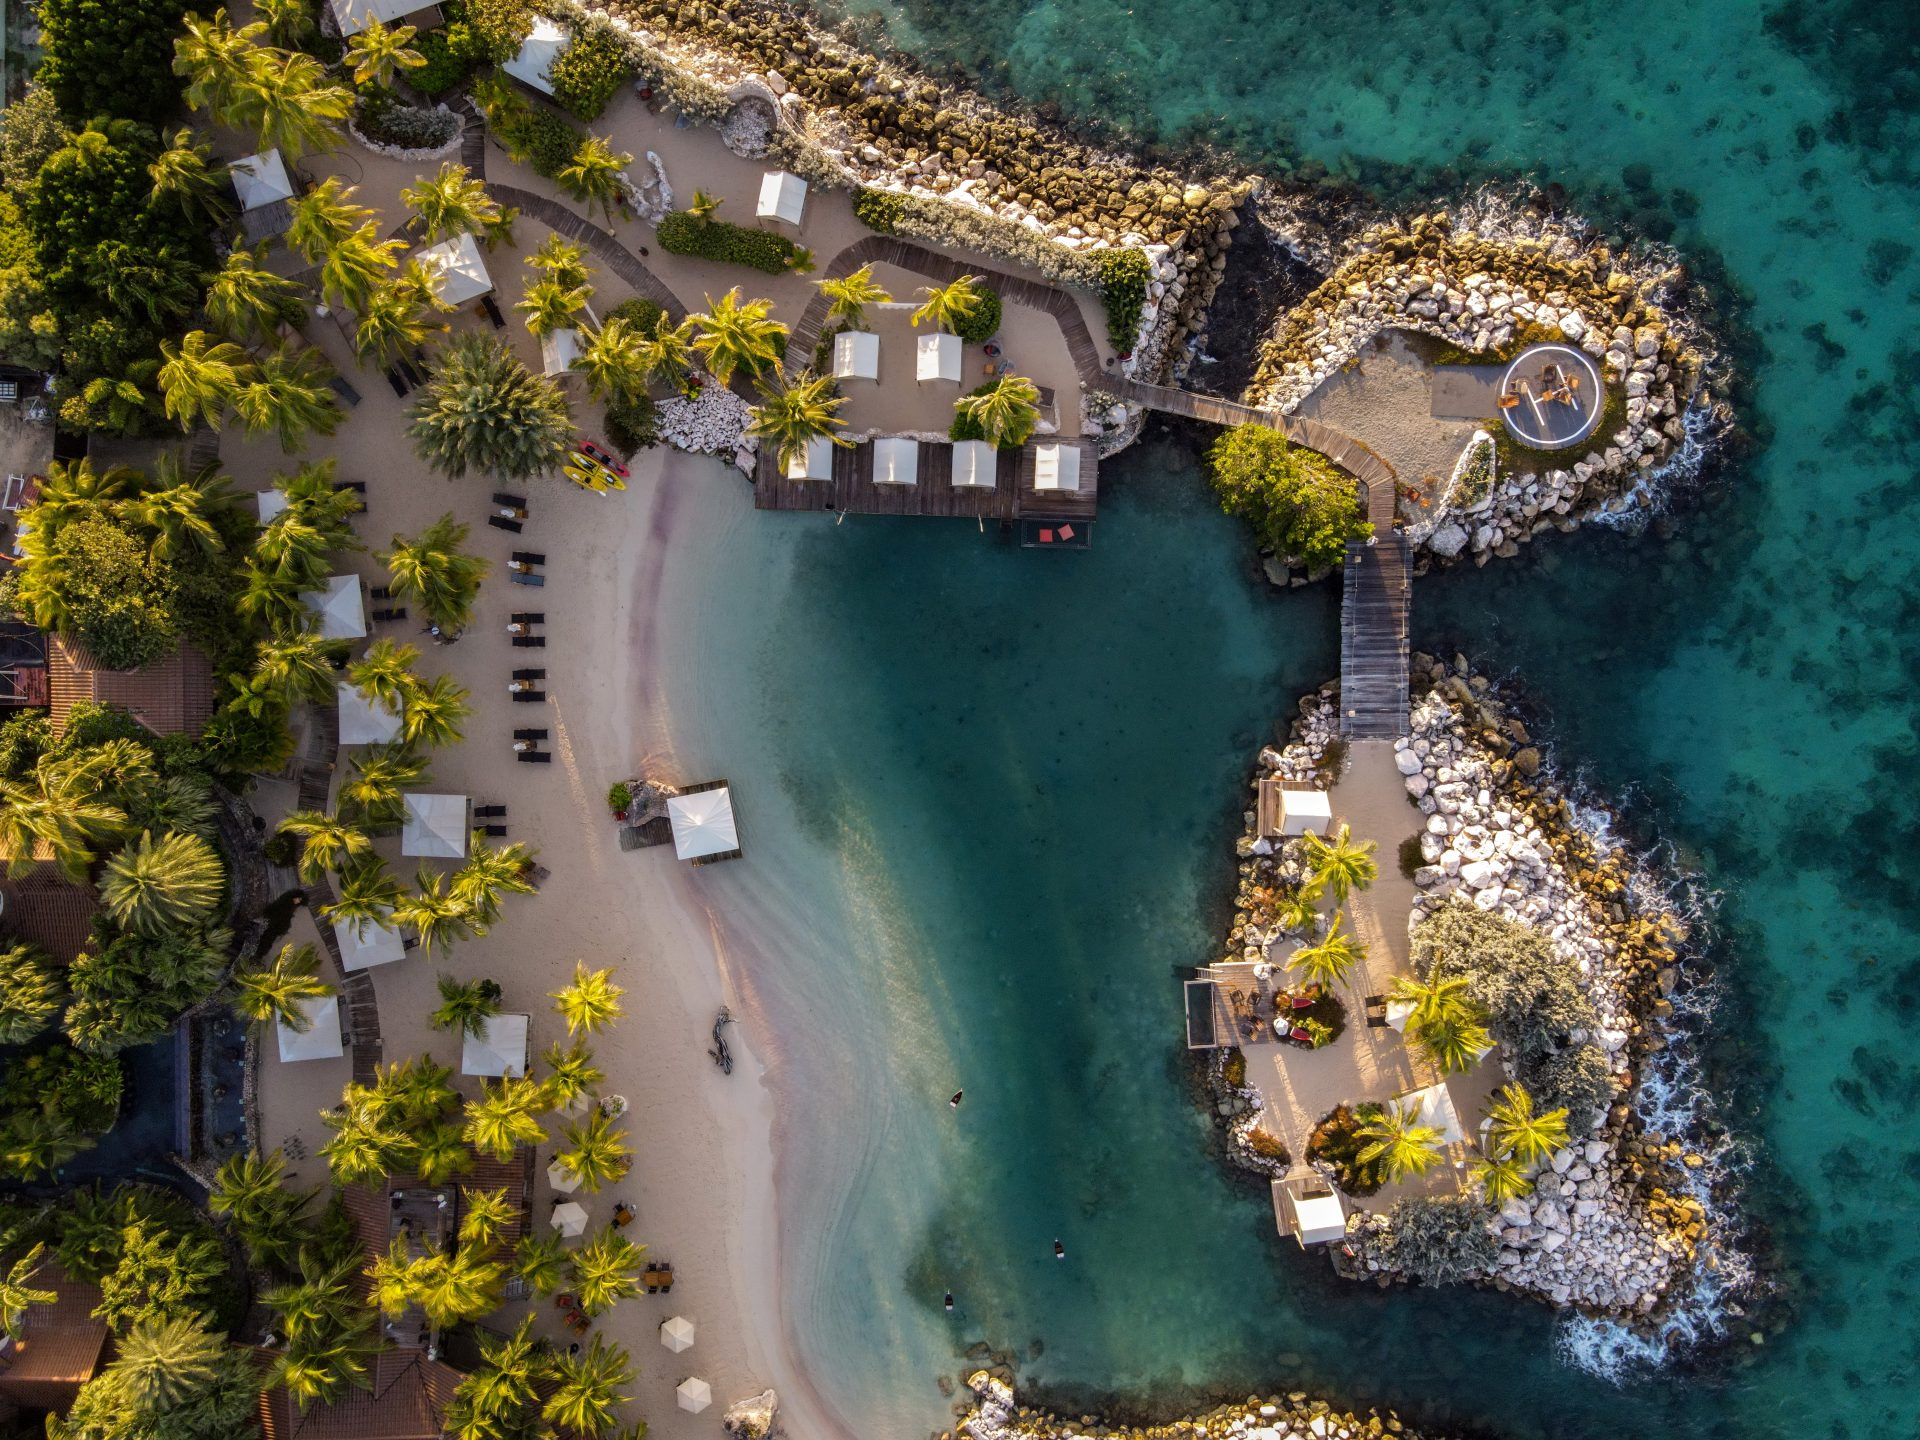 Drone image of luxury resort in the Caribbean